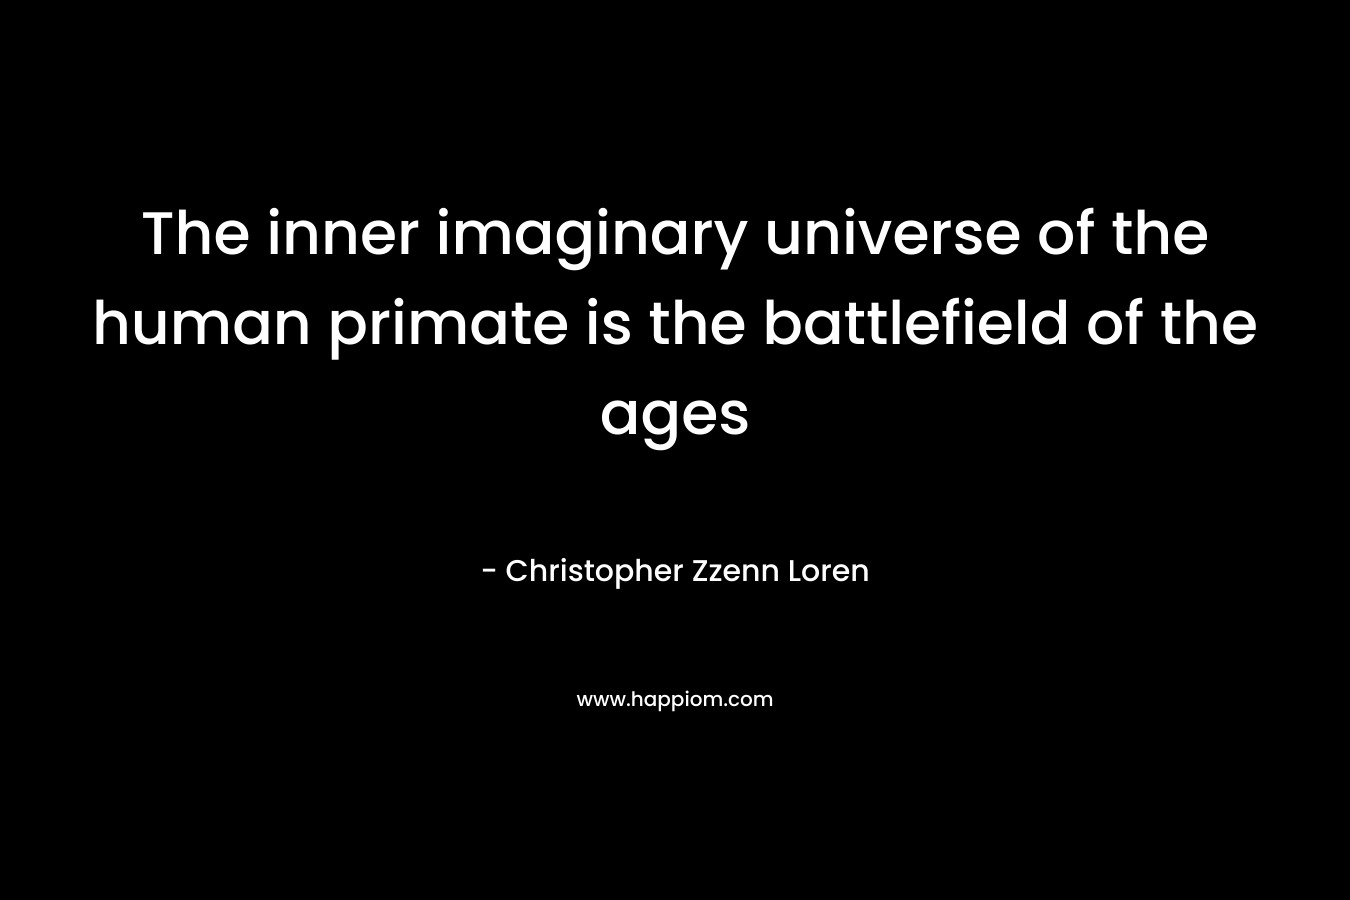 The inner imaginary universe of the human primate is the battlefield of the ages – Christopher Zzenn Loren